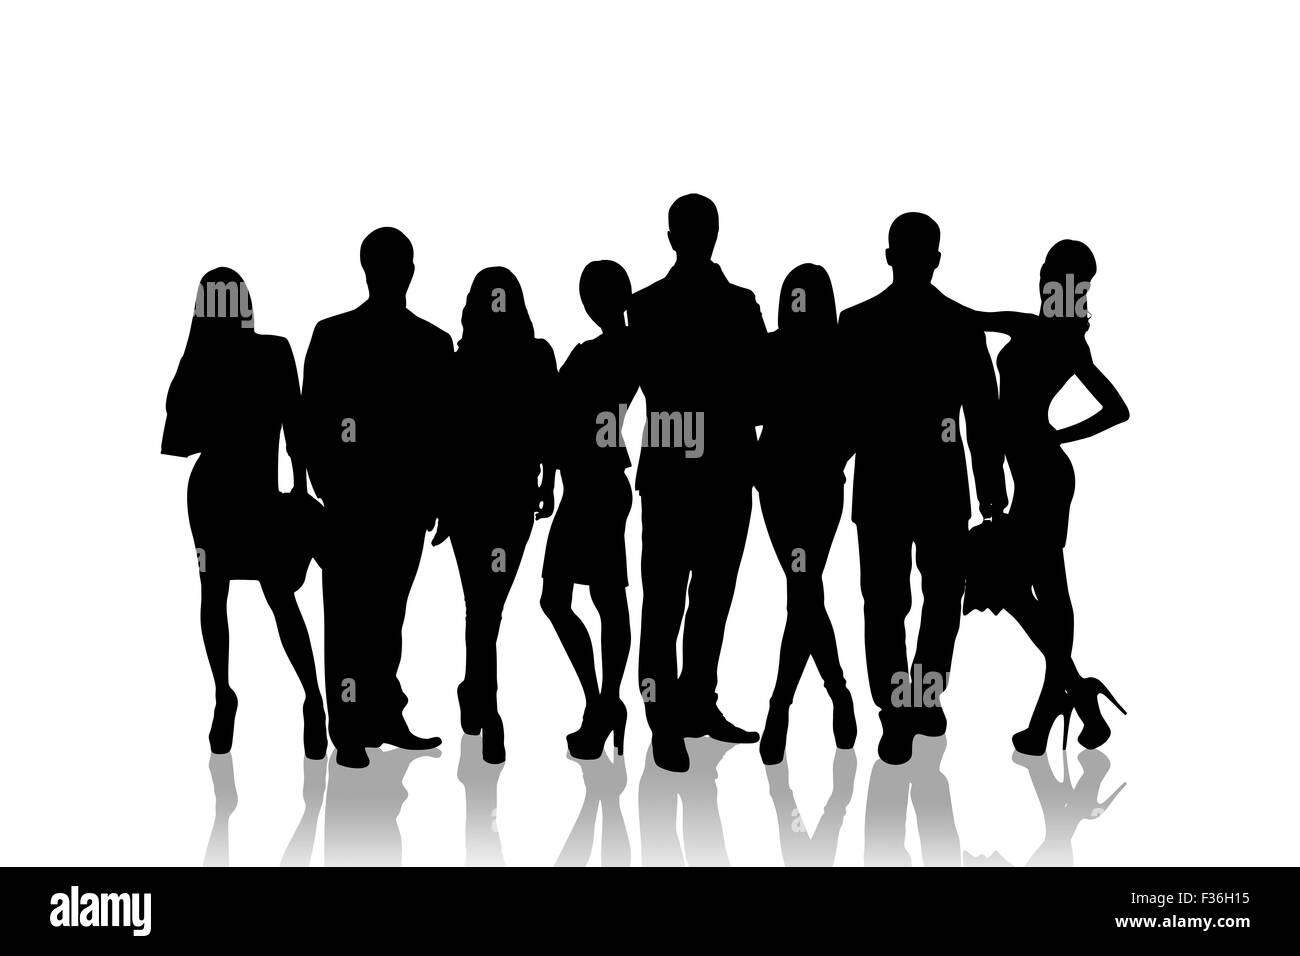 Large group of people silhouette Stock Photo